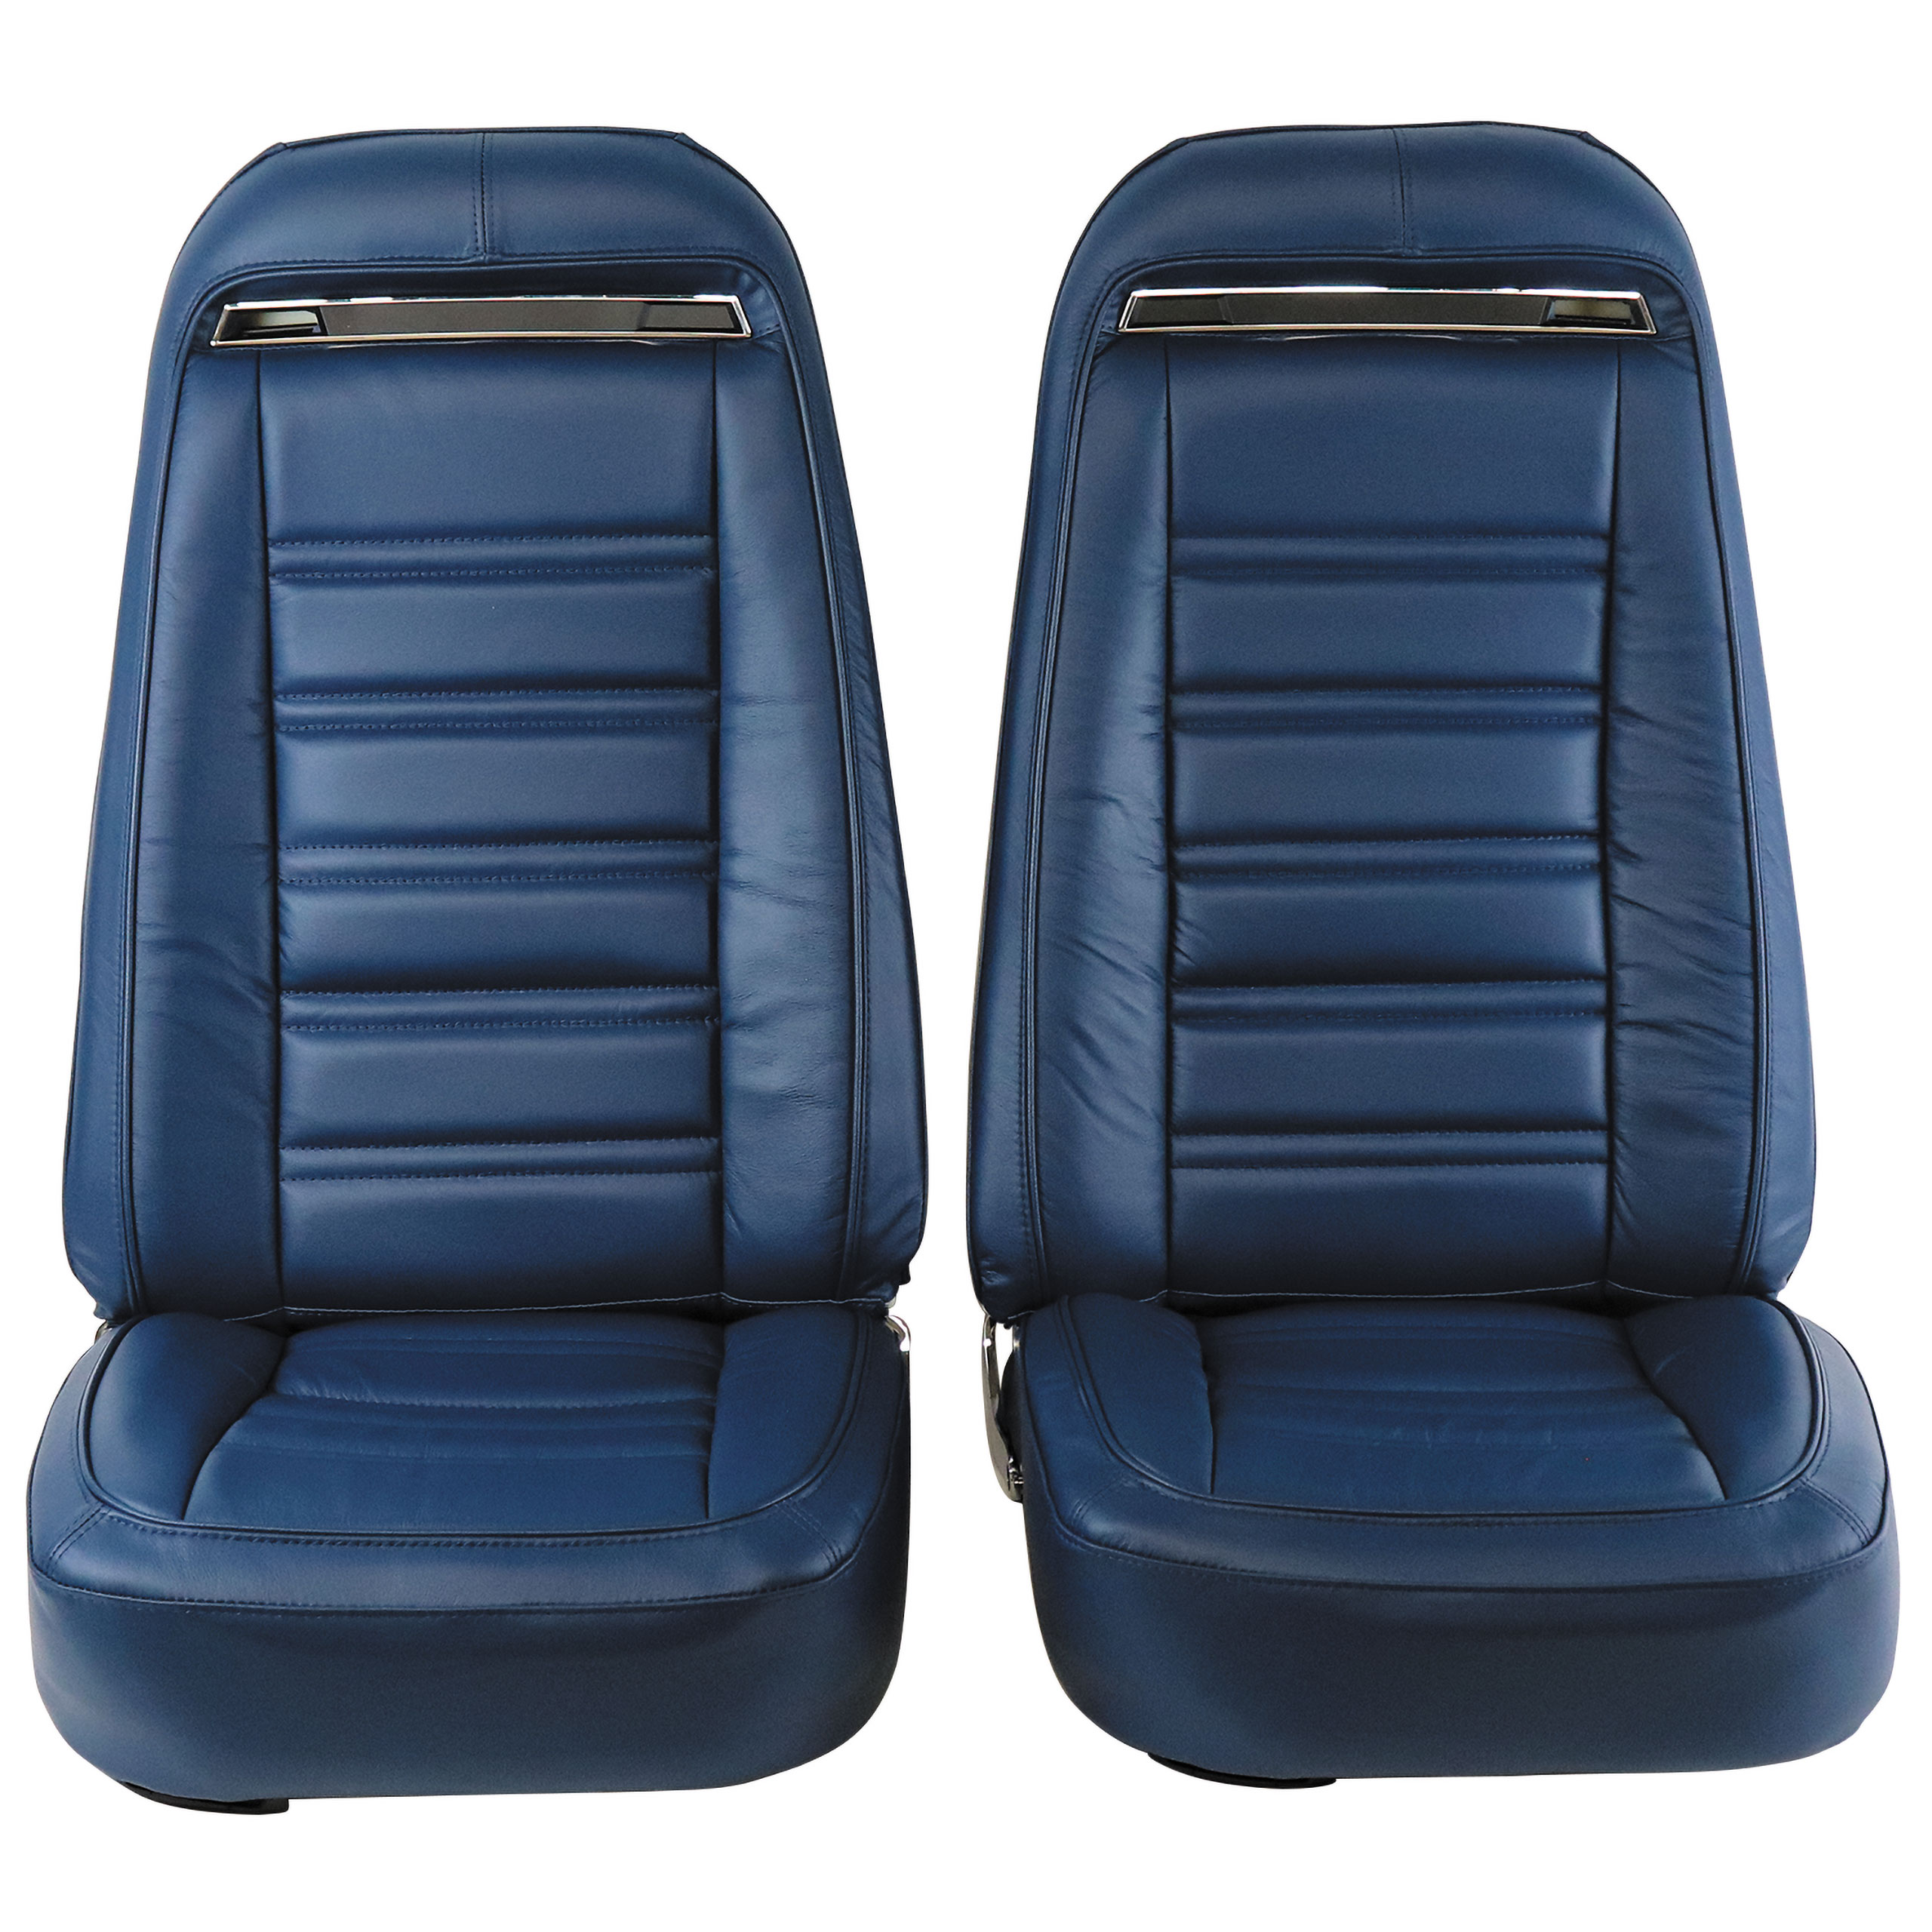 1972 C3 Corvette Mounted Seats Royal Blue Leather Vinyl With Shoulder Harness